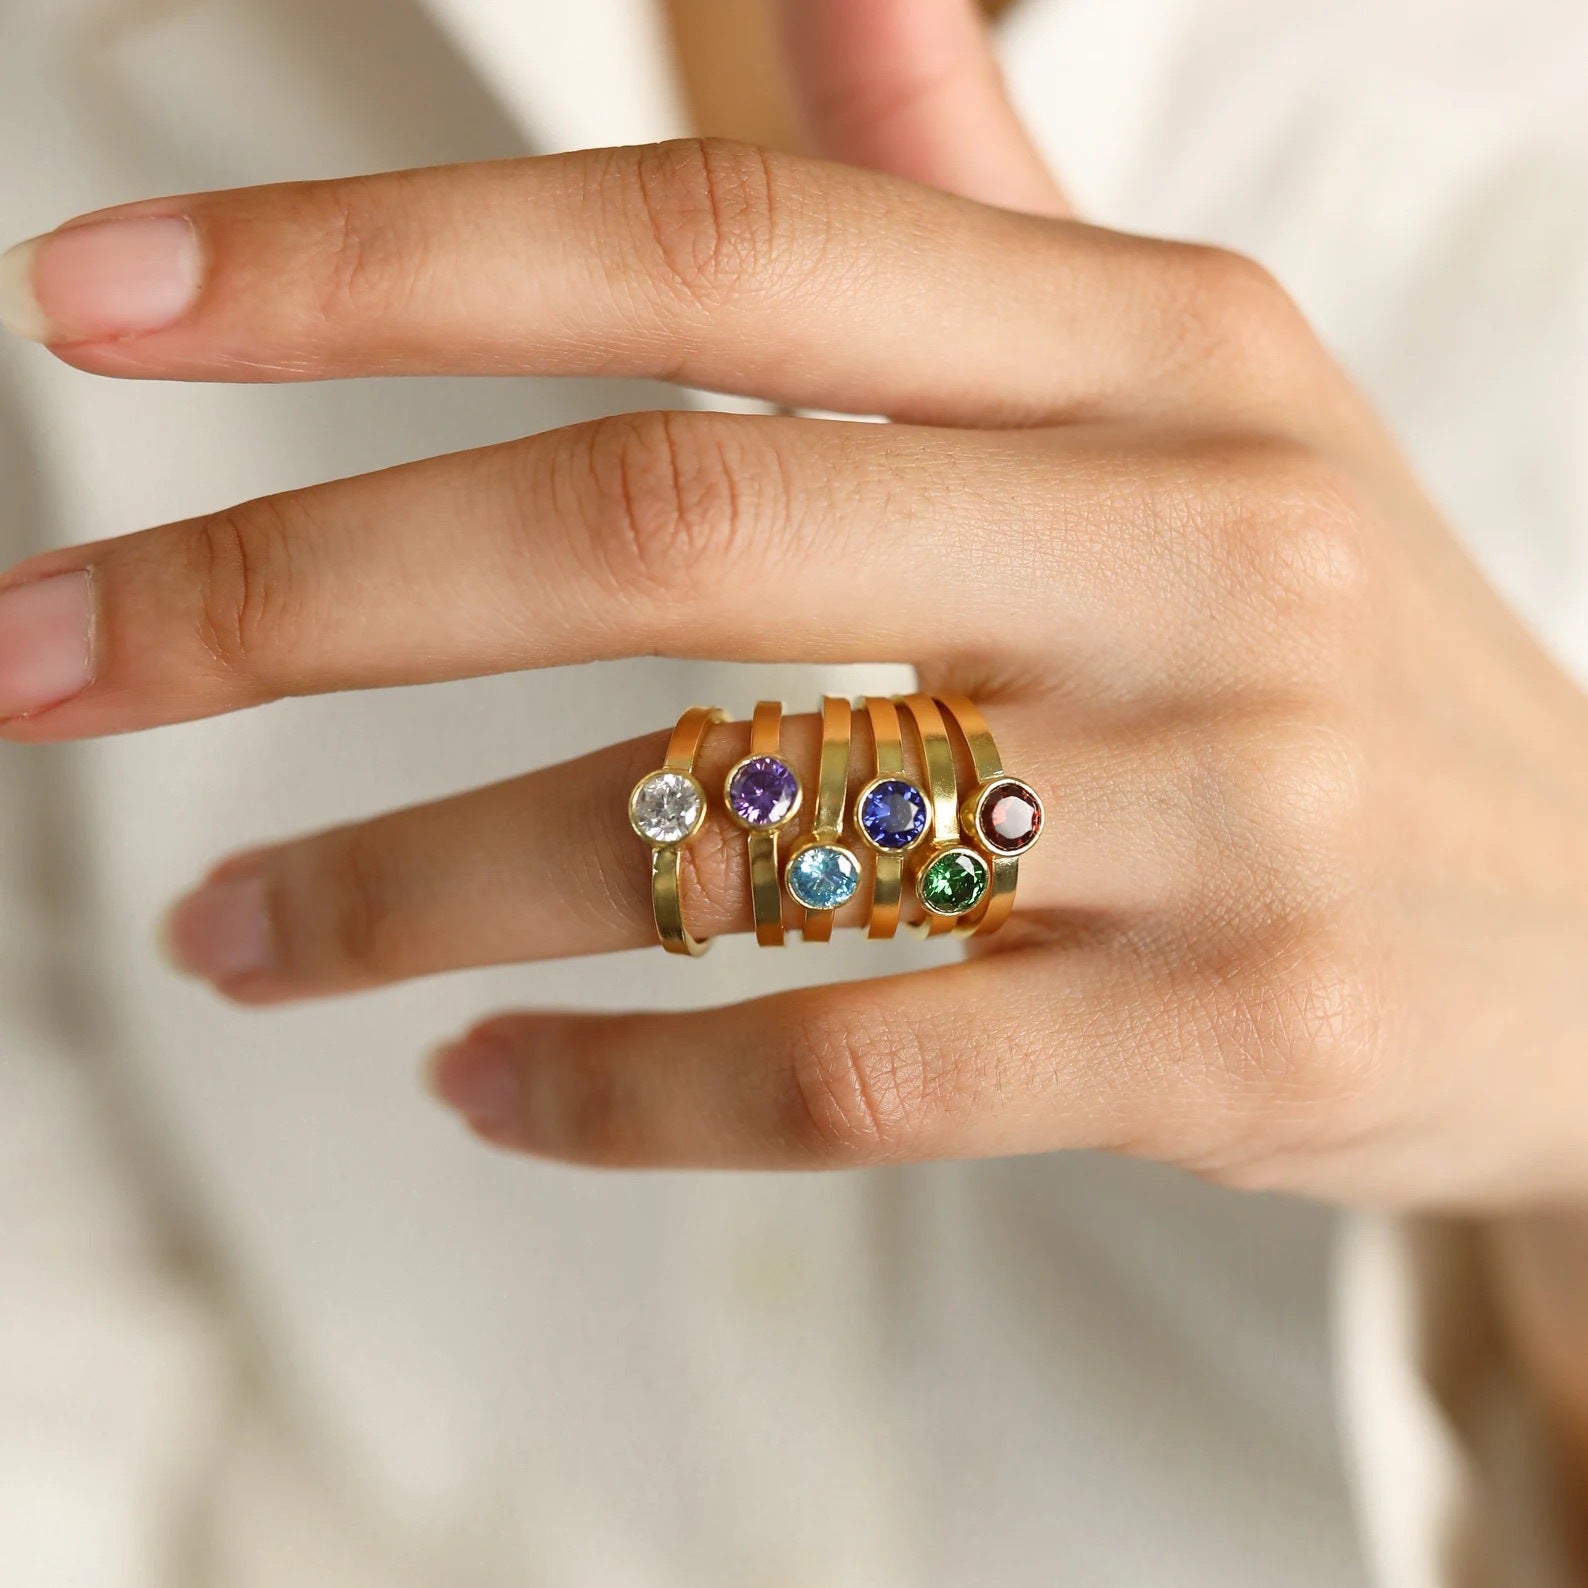 Birthstone Rings For Mom GOLD